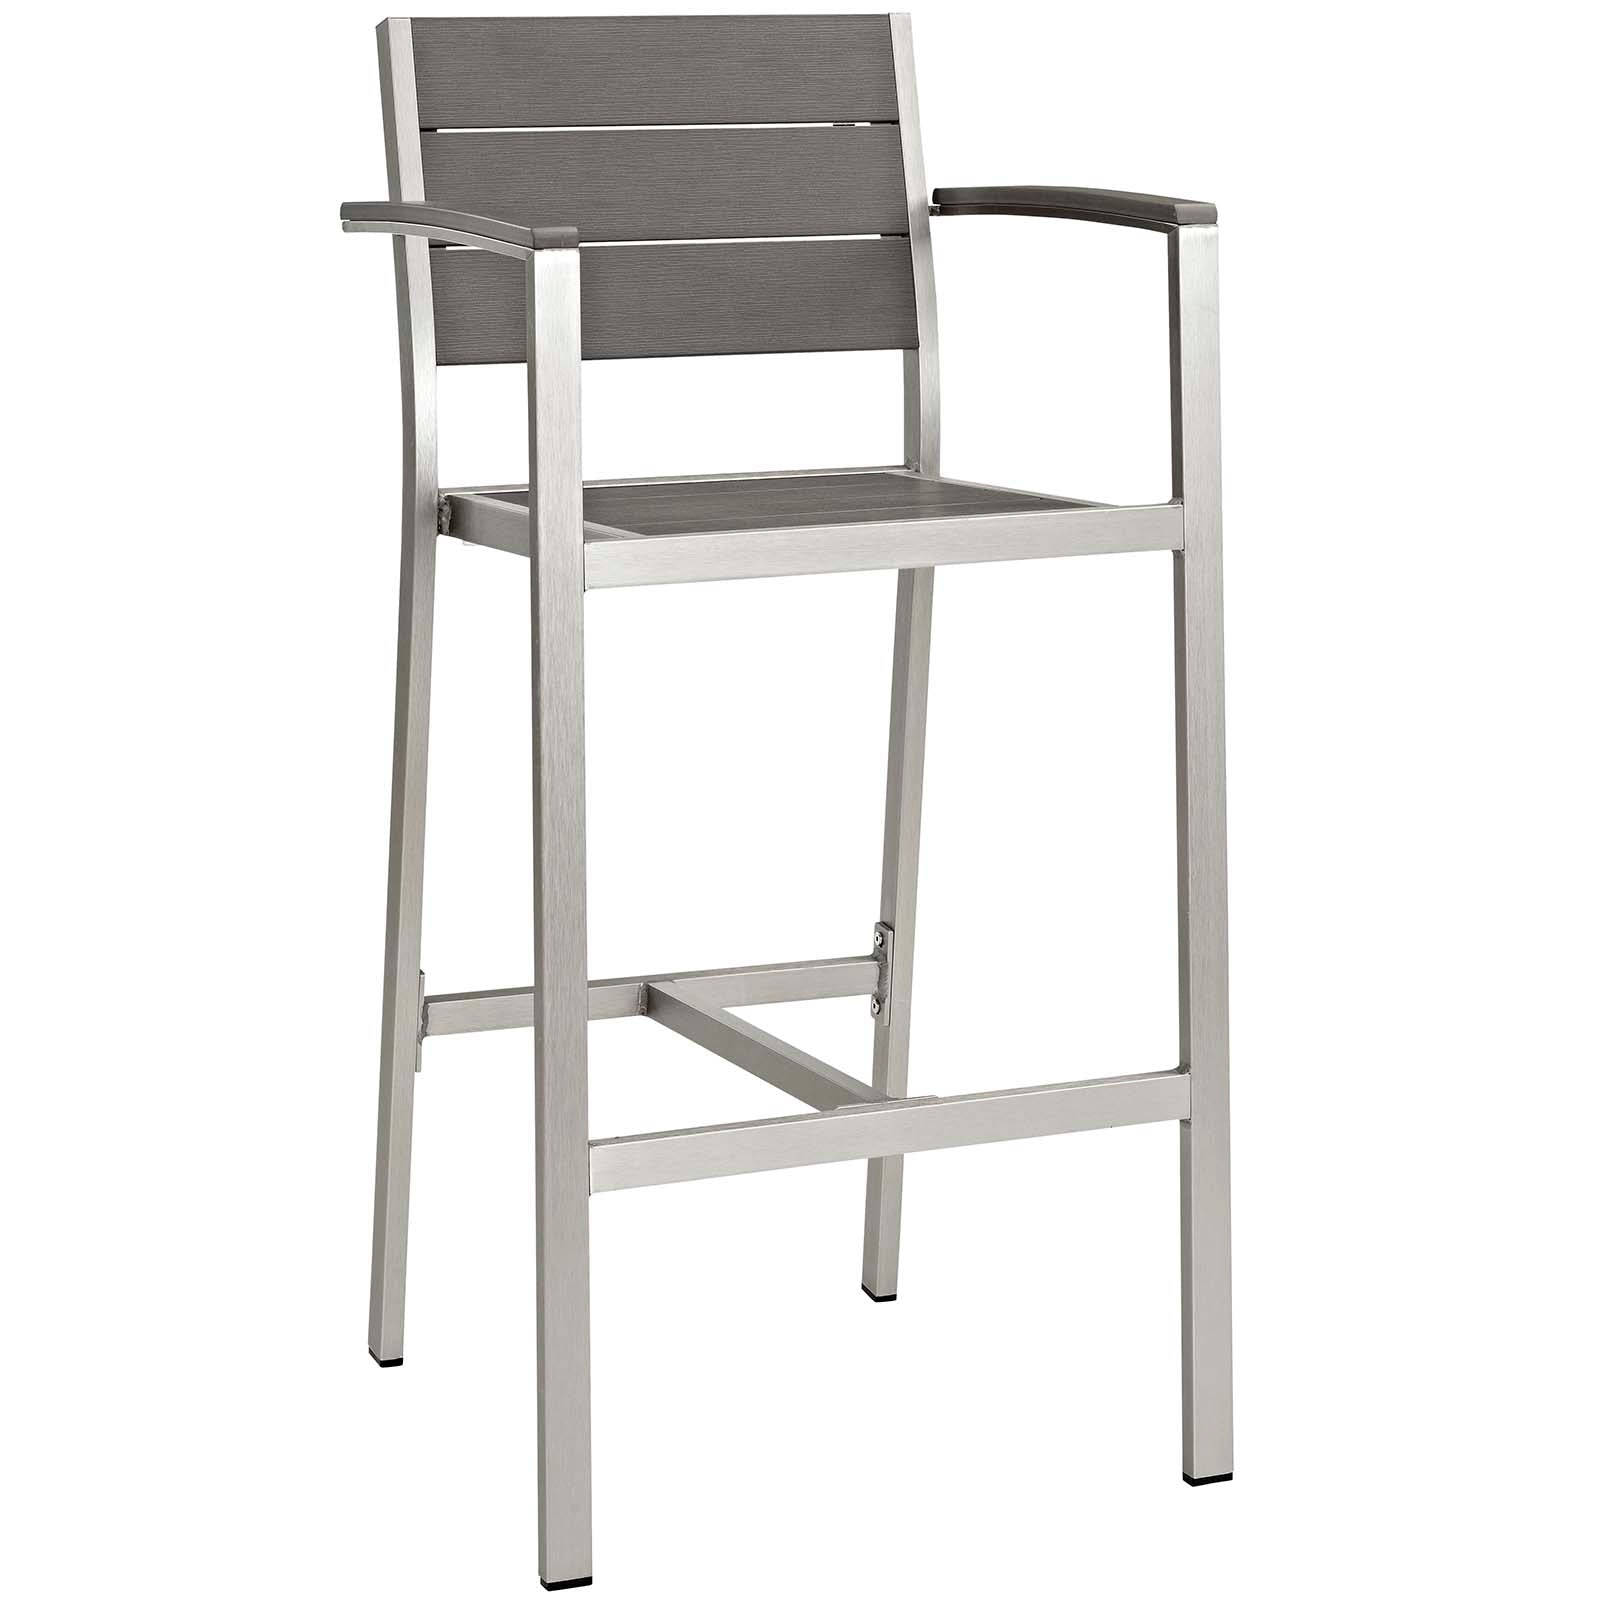 Modway Outdoor Barstools - Shore Outdoor Barstool Silver Gray (Set of 2)